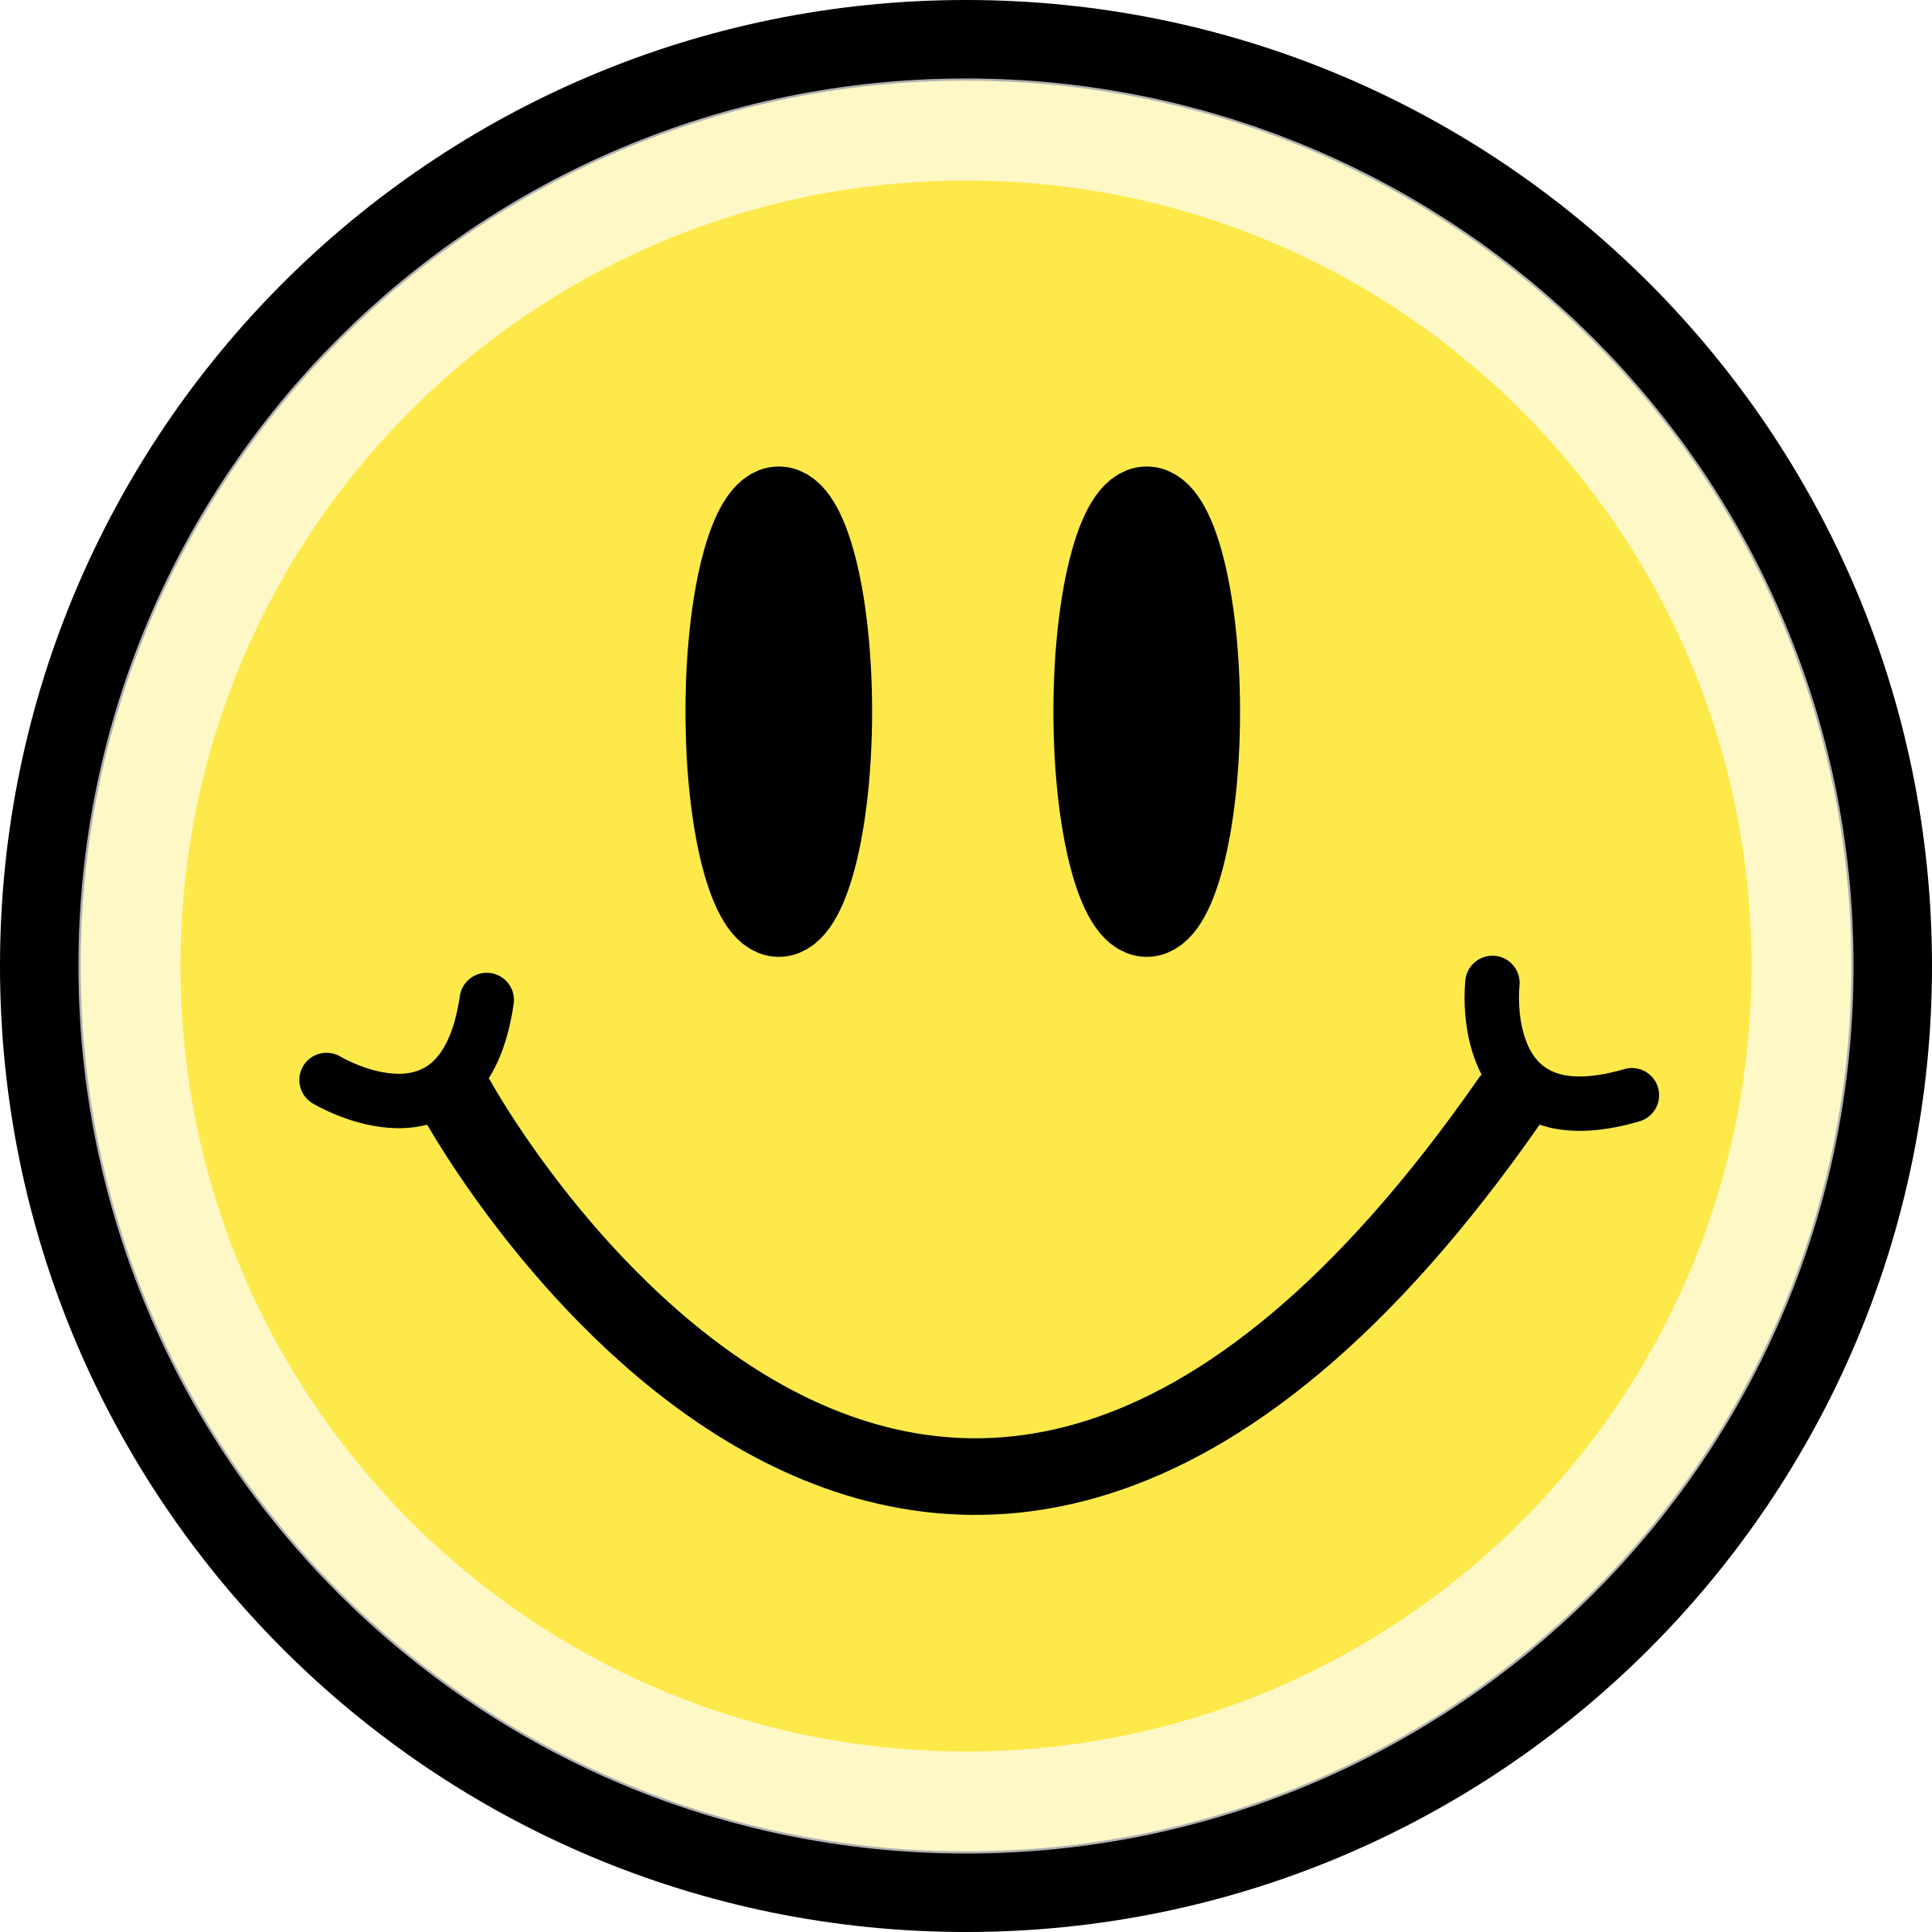 Yellow circle with smiling face